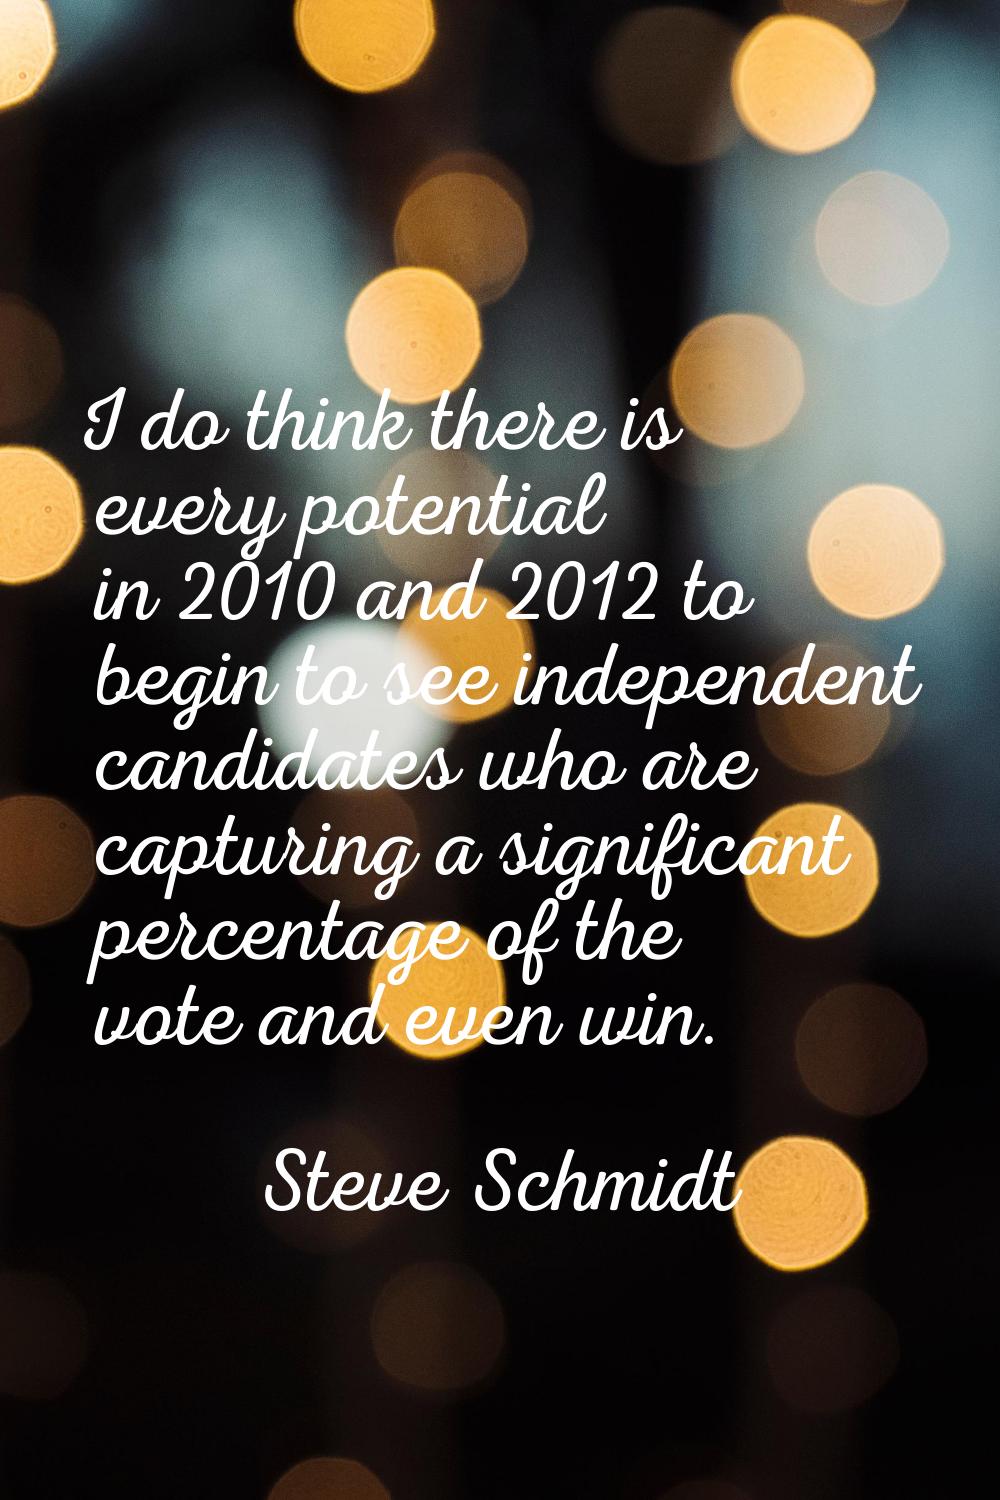 I do think there is every potential in 2010 and 2012 to begin to see independent candidates who are